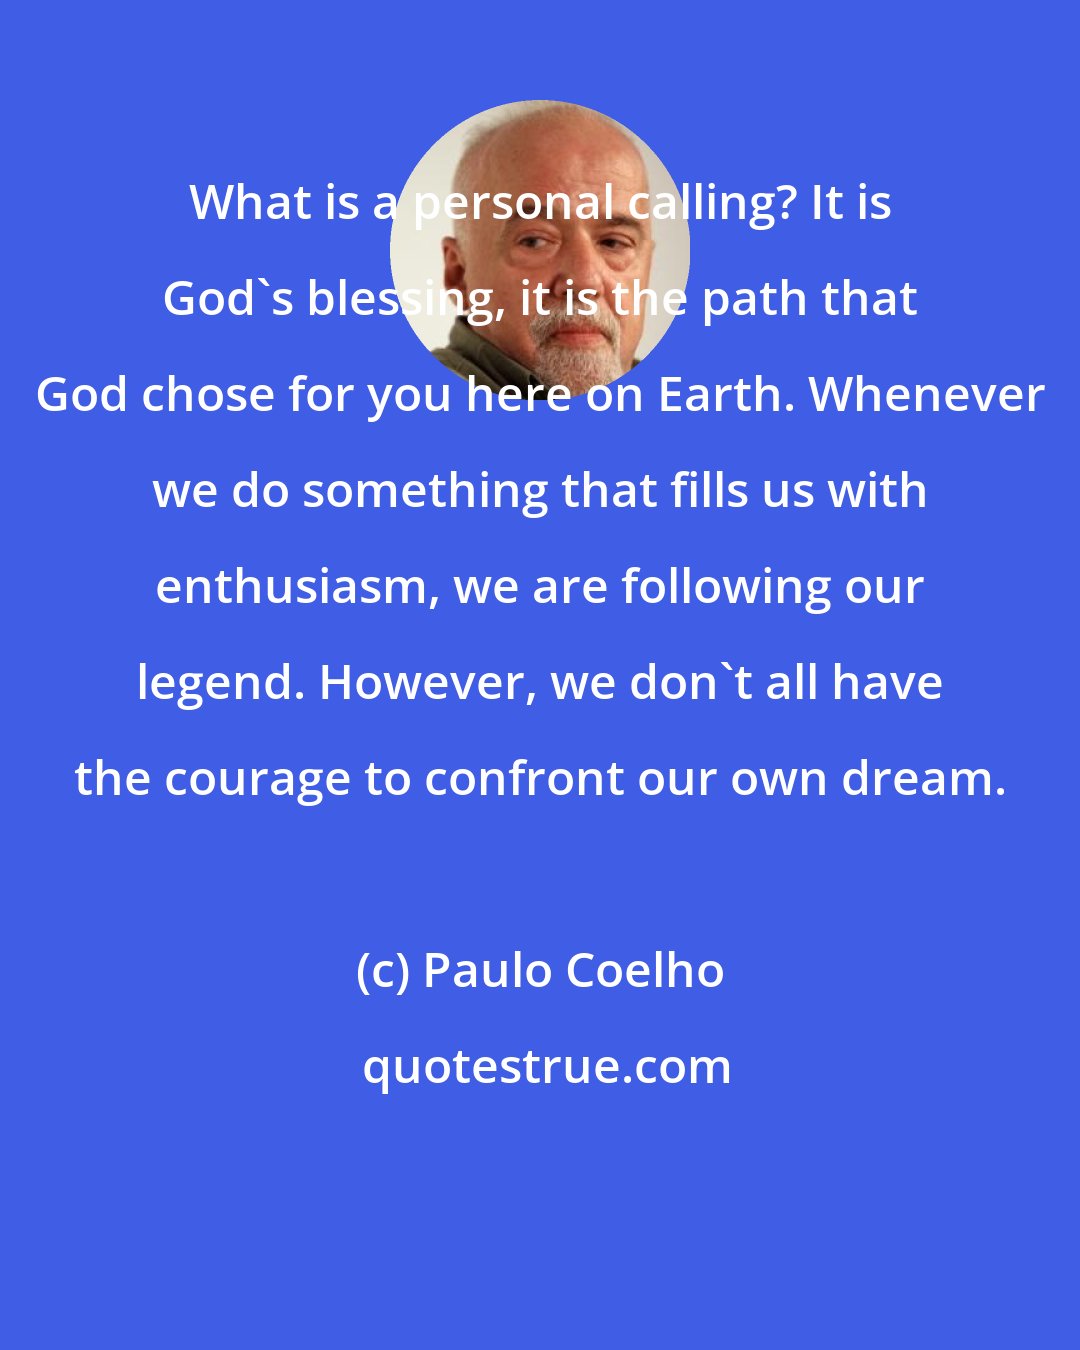 Paulo Coelho: What is a personal calling? It is God's blessing, it is the path that God chose for you here on Earth. Whenever we do something that fills us with enthusiasm, we are following our legend. However, we don't all have the courage to confront our own dream.